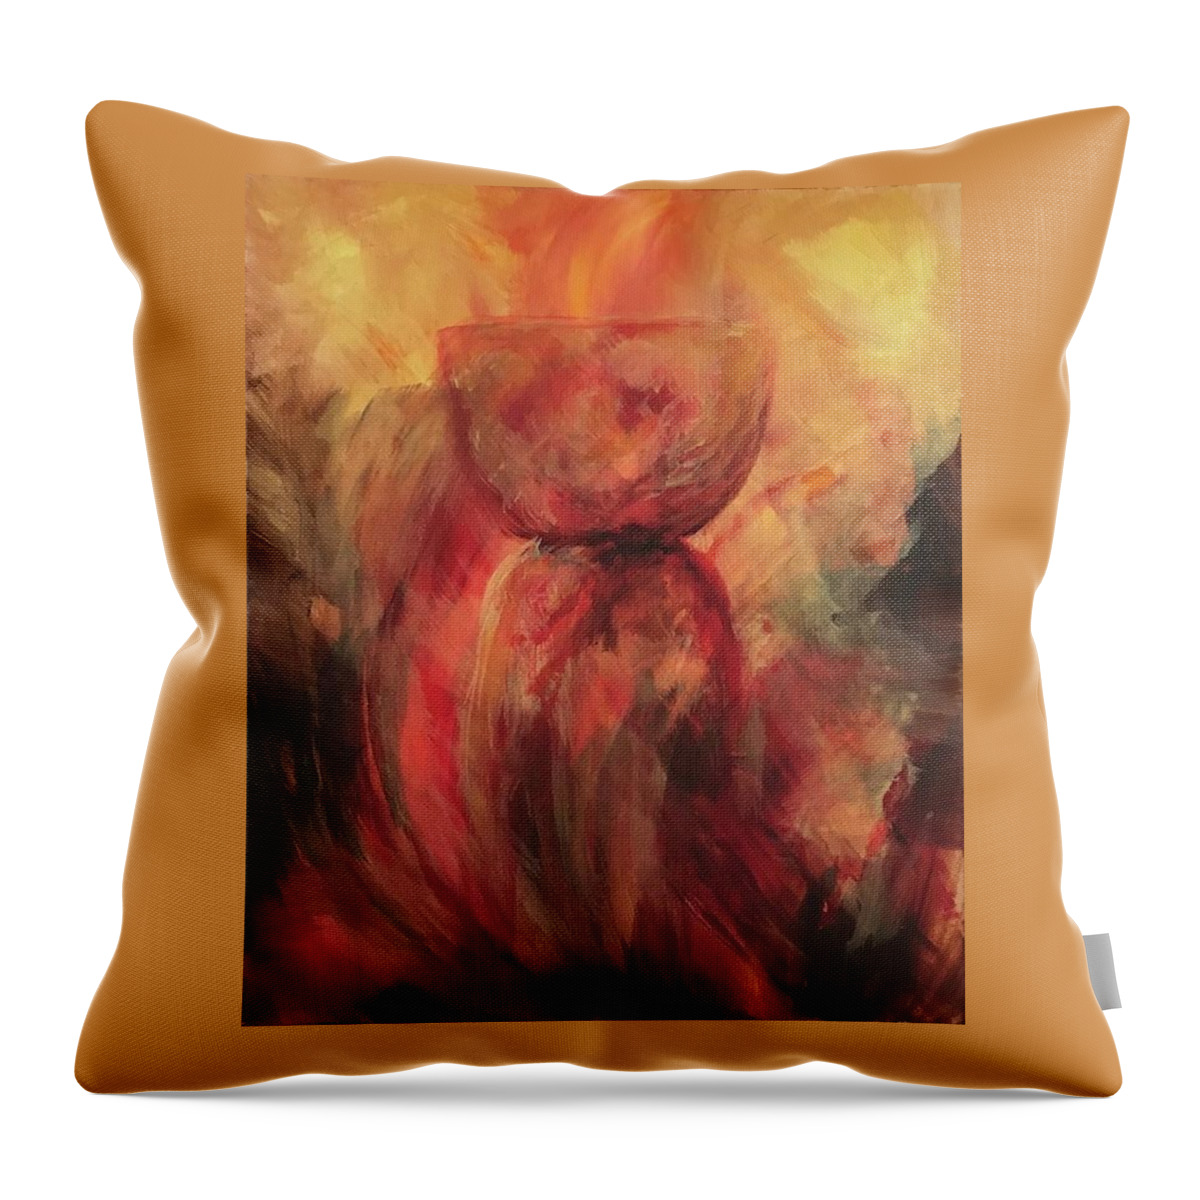 Guam Throw Pillow featuring the painting Fire Earth Latte Stone by Michelle Pier